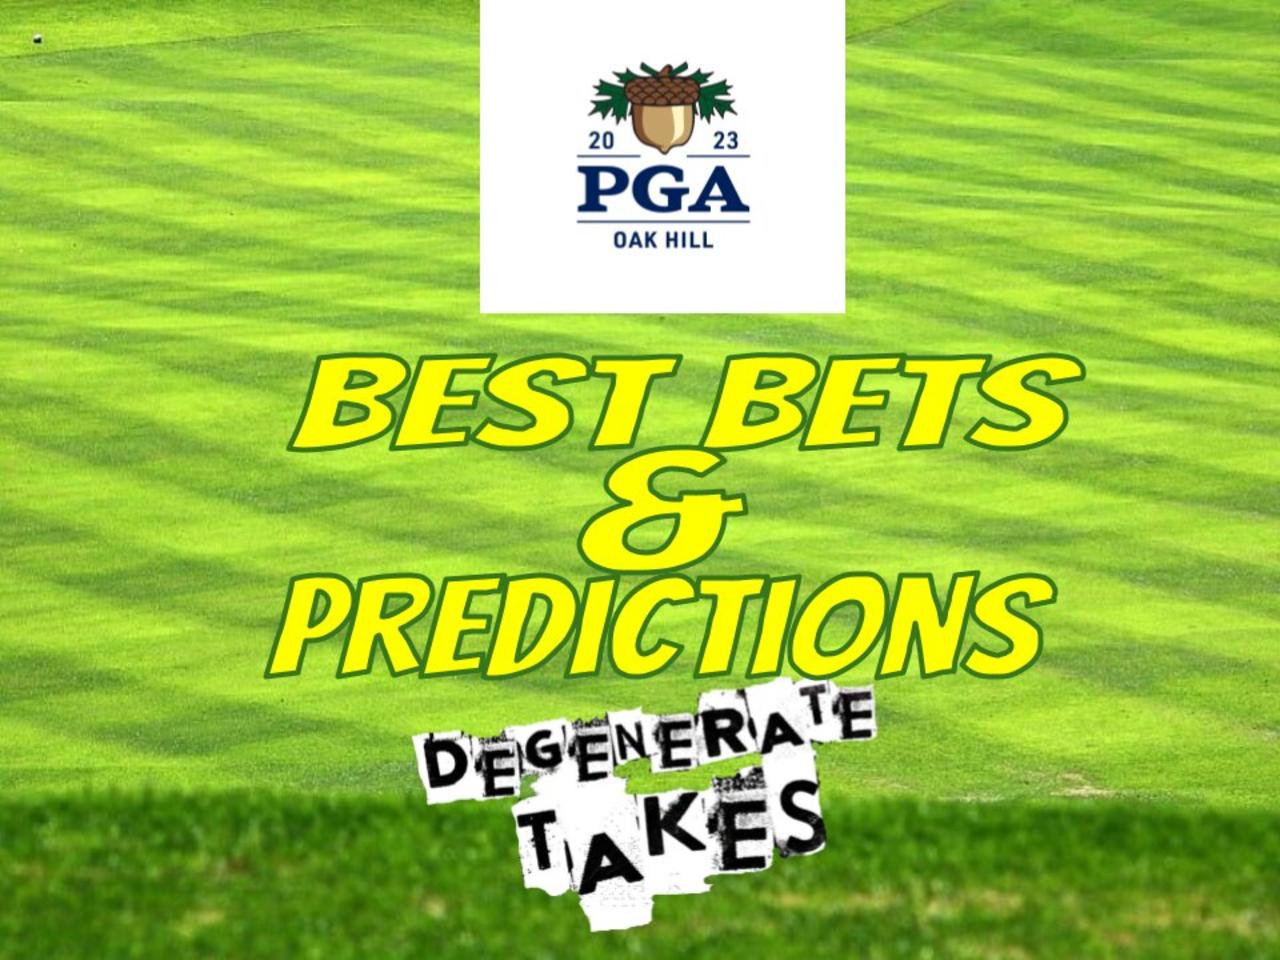 PGA Championship Best Bets & Predictions One News Page VIDEO